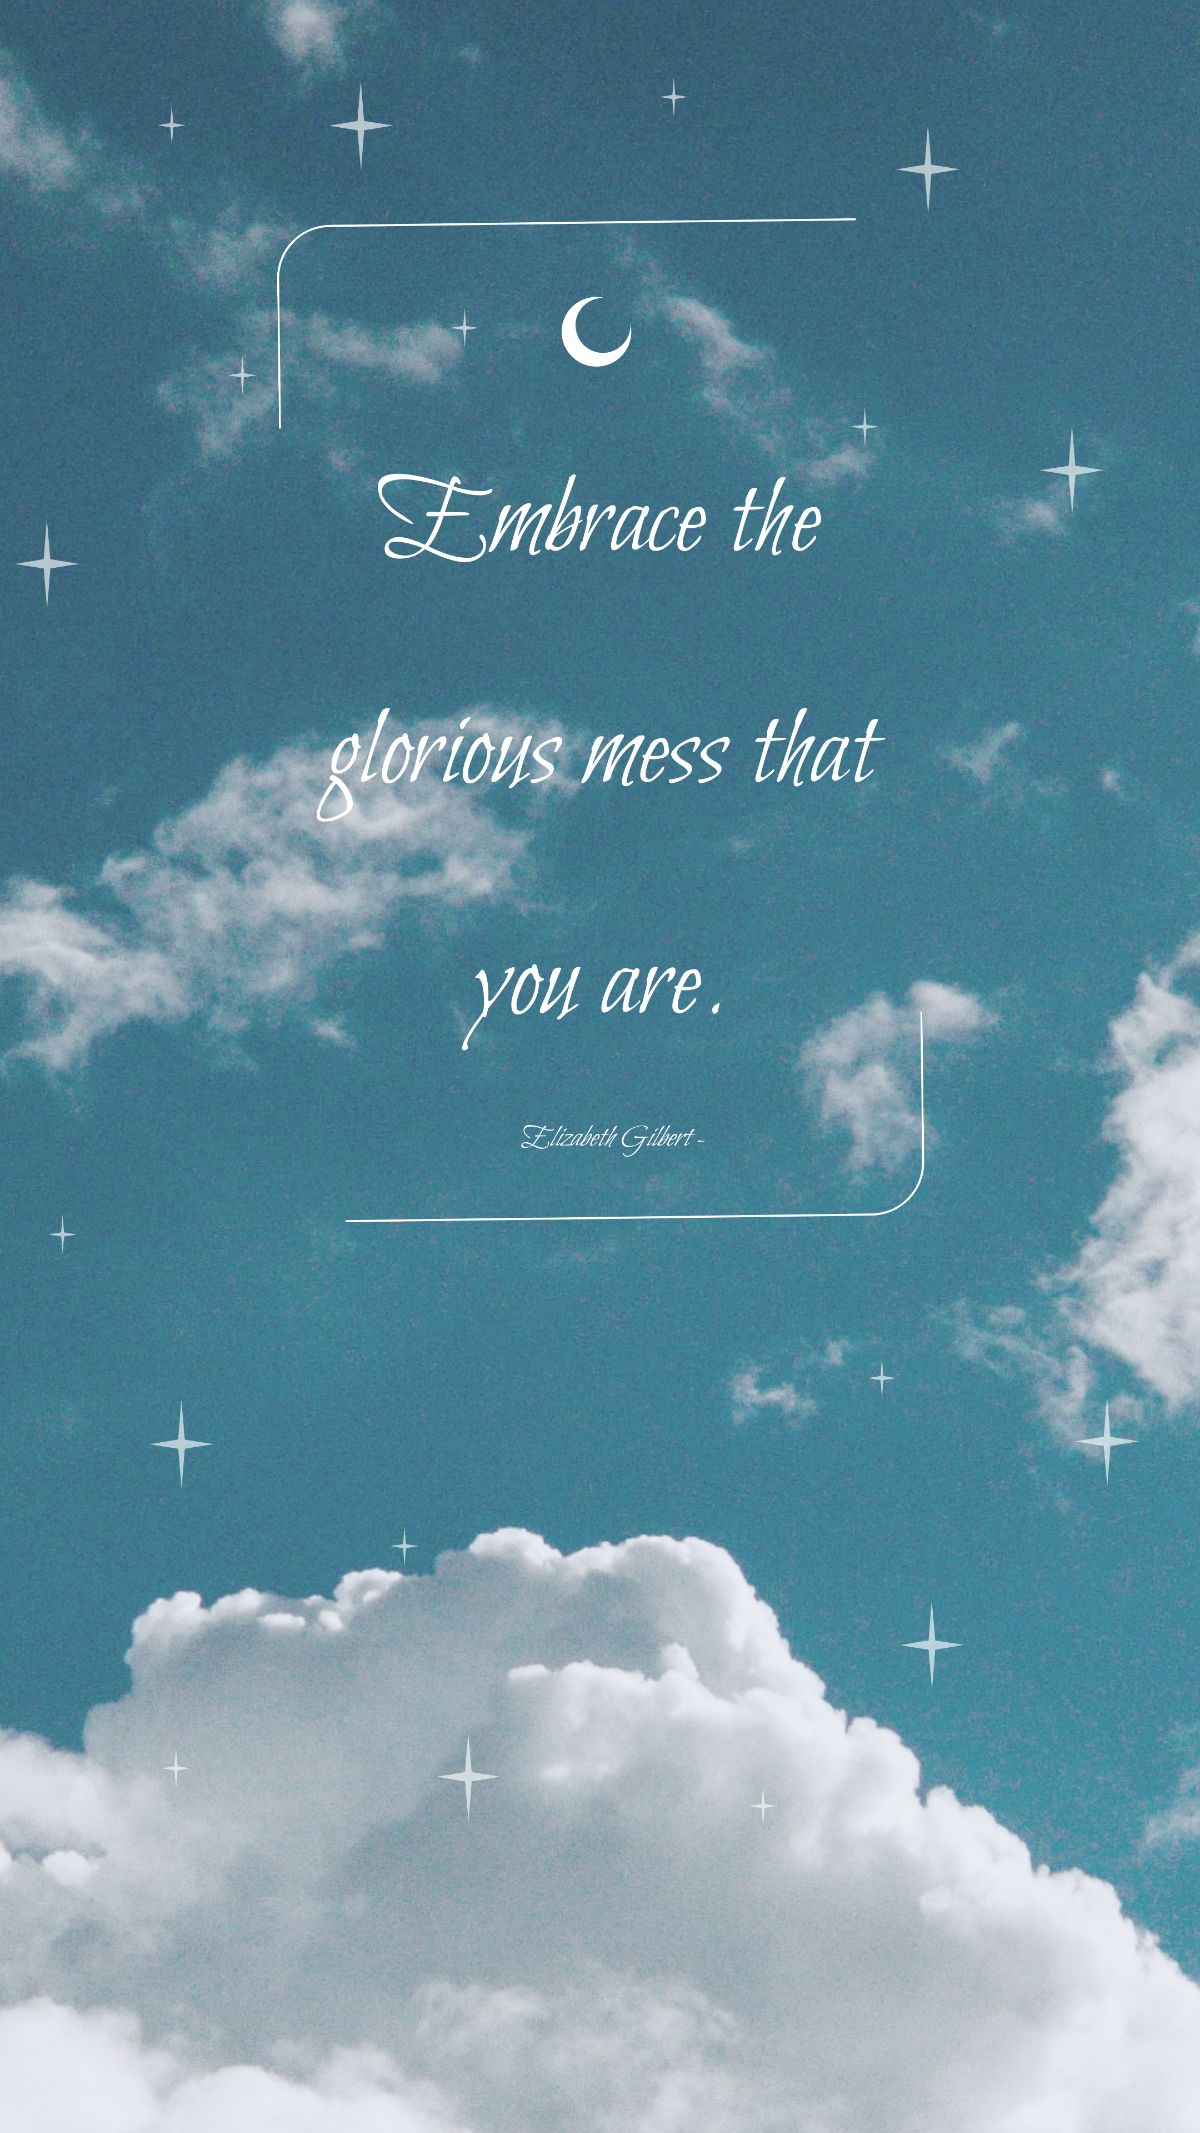 Elizabeth Gilbert - Embrace the glorious mess that you are. Template